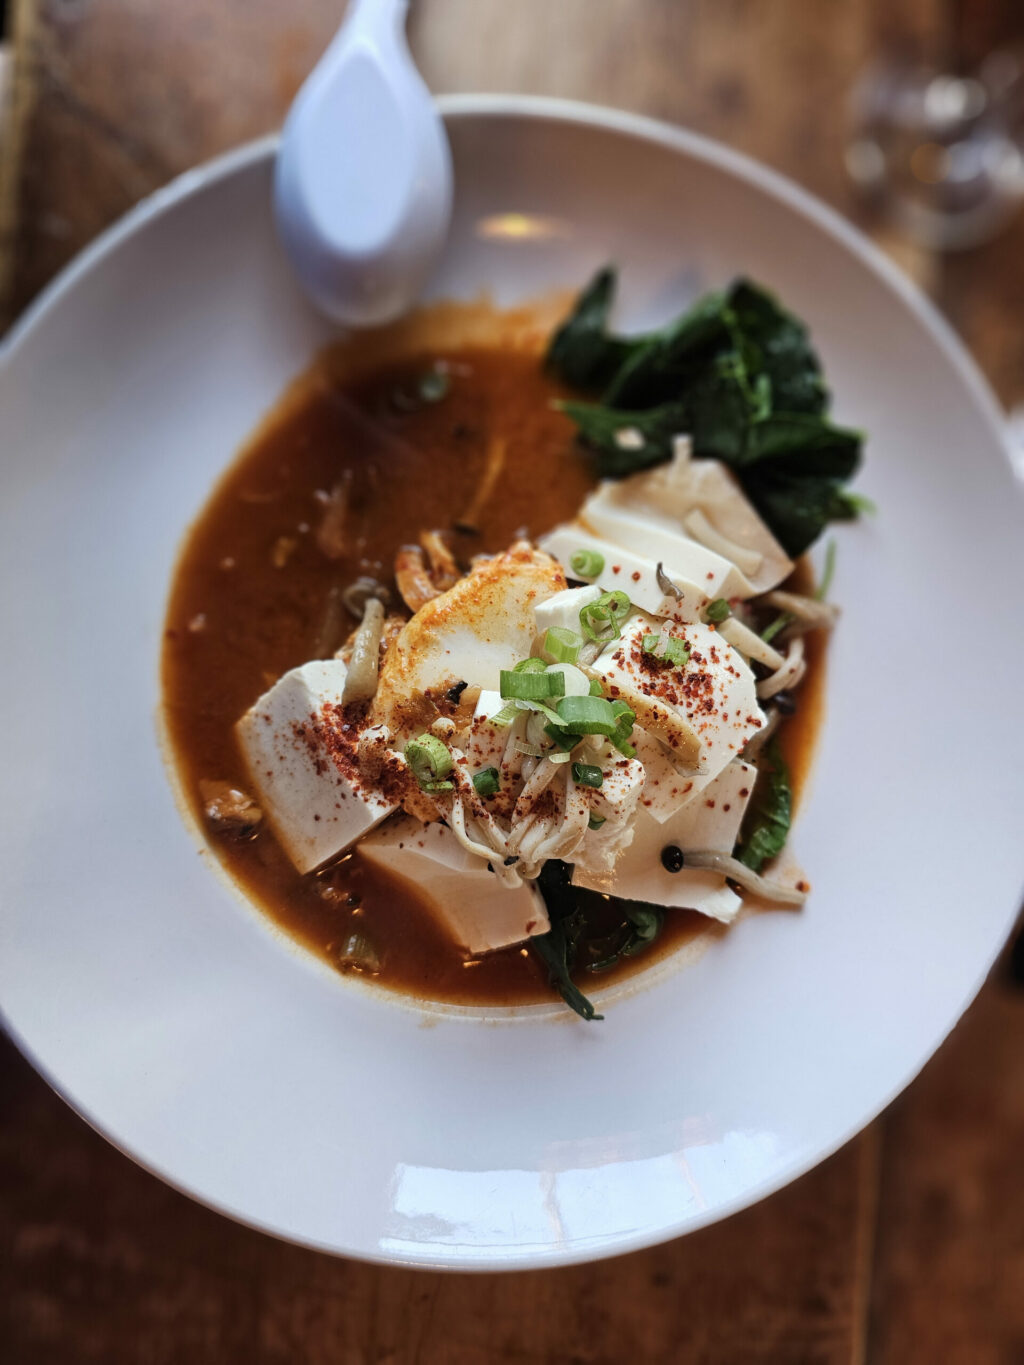 Kimchi and tofu stew with enoki mushrooms and a duck egg at The Casino's Half Hitch pop-up. (Heather Irwin)